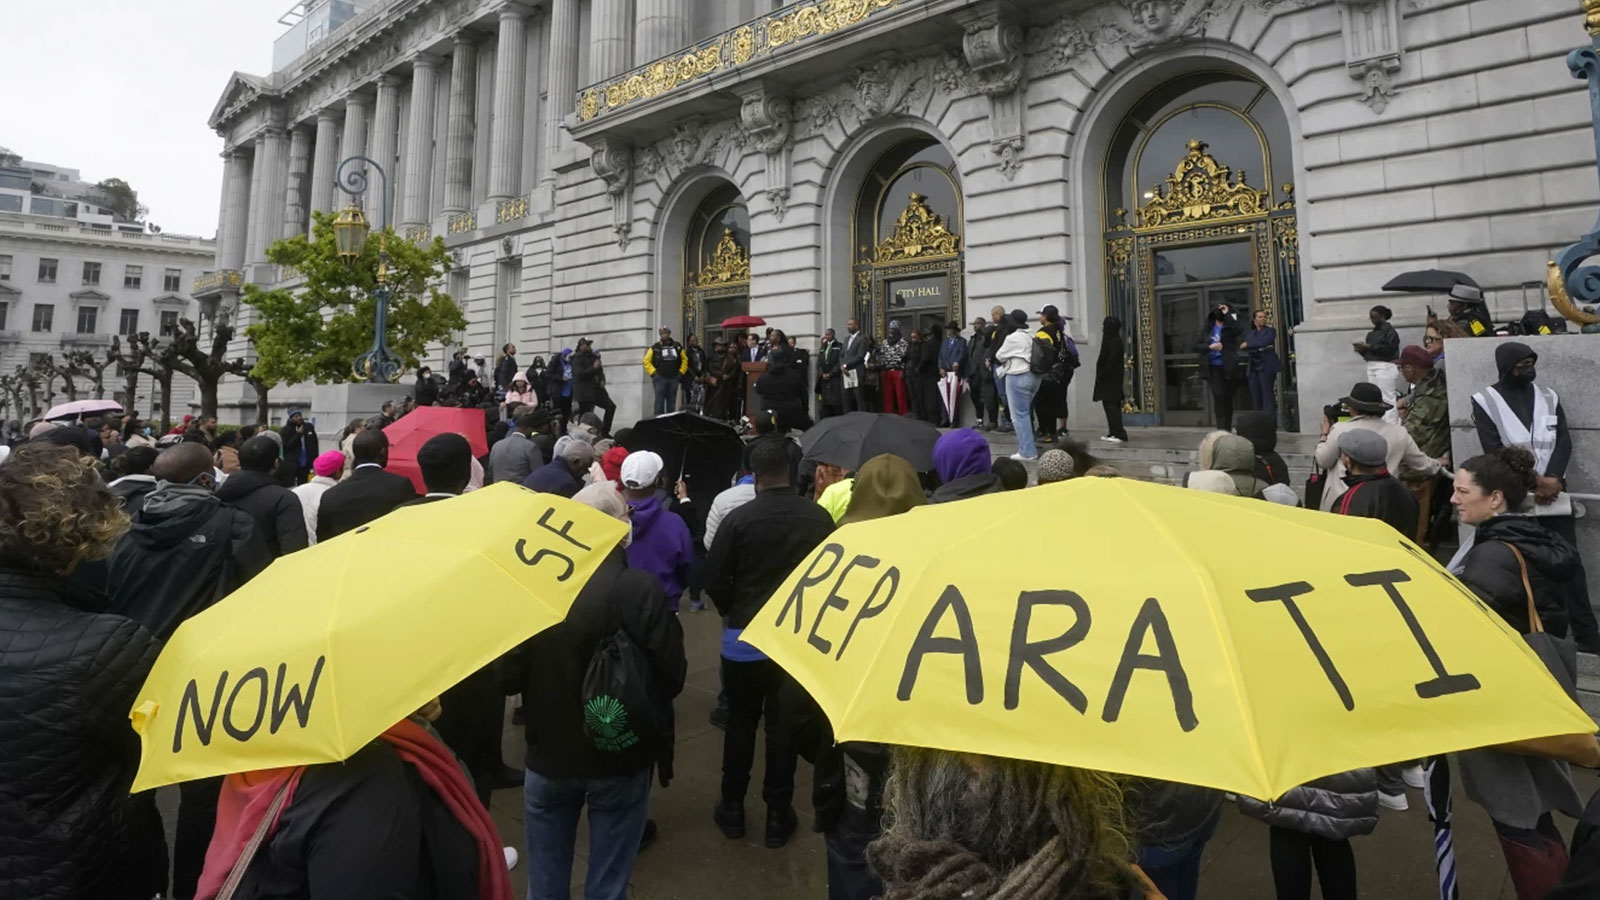 San Francisco apologizes to Black residents for decades of racist policies